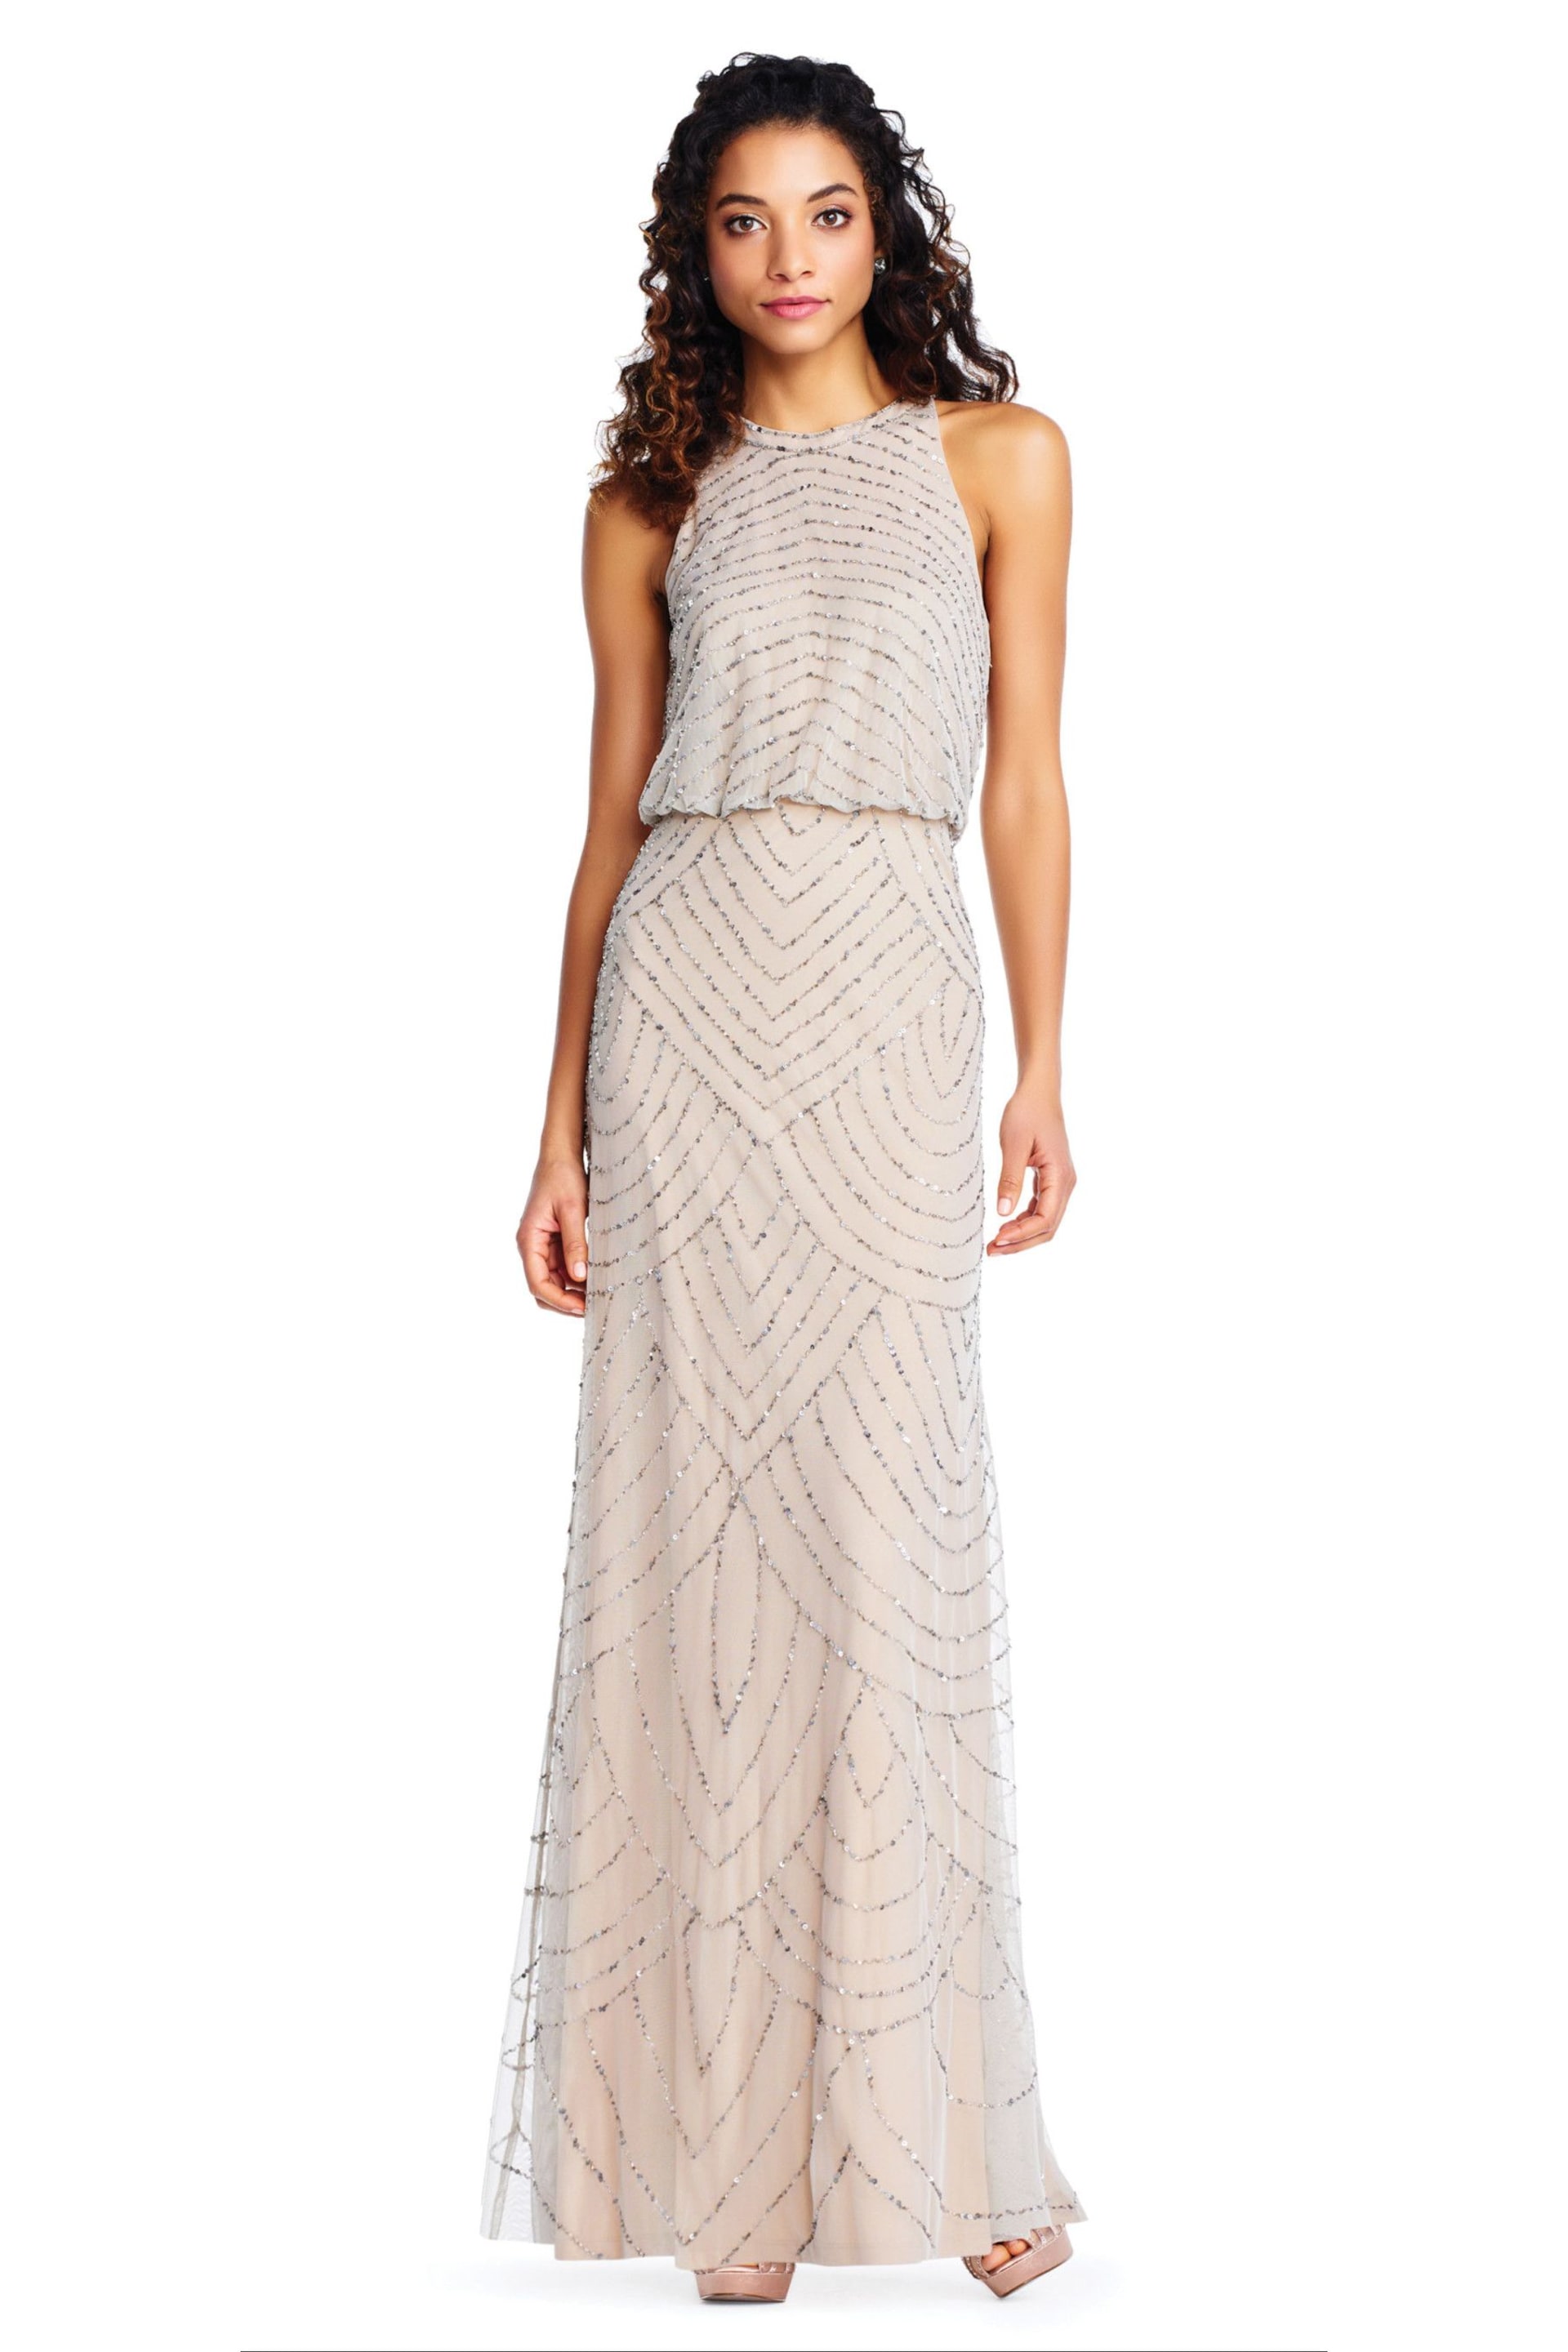 Adrianna Papell Beaded Halter Gown - Image 1 of 4